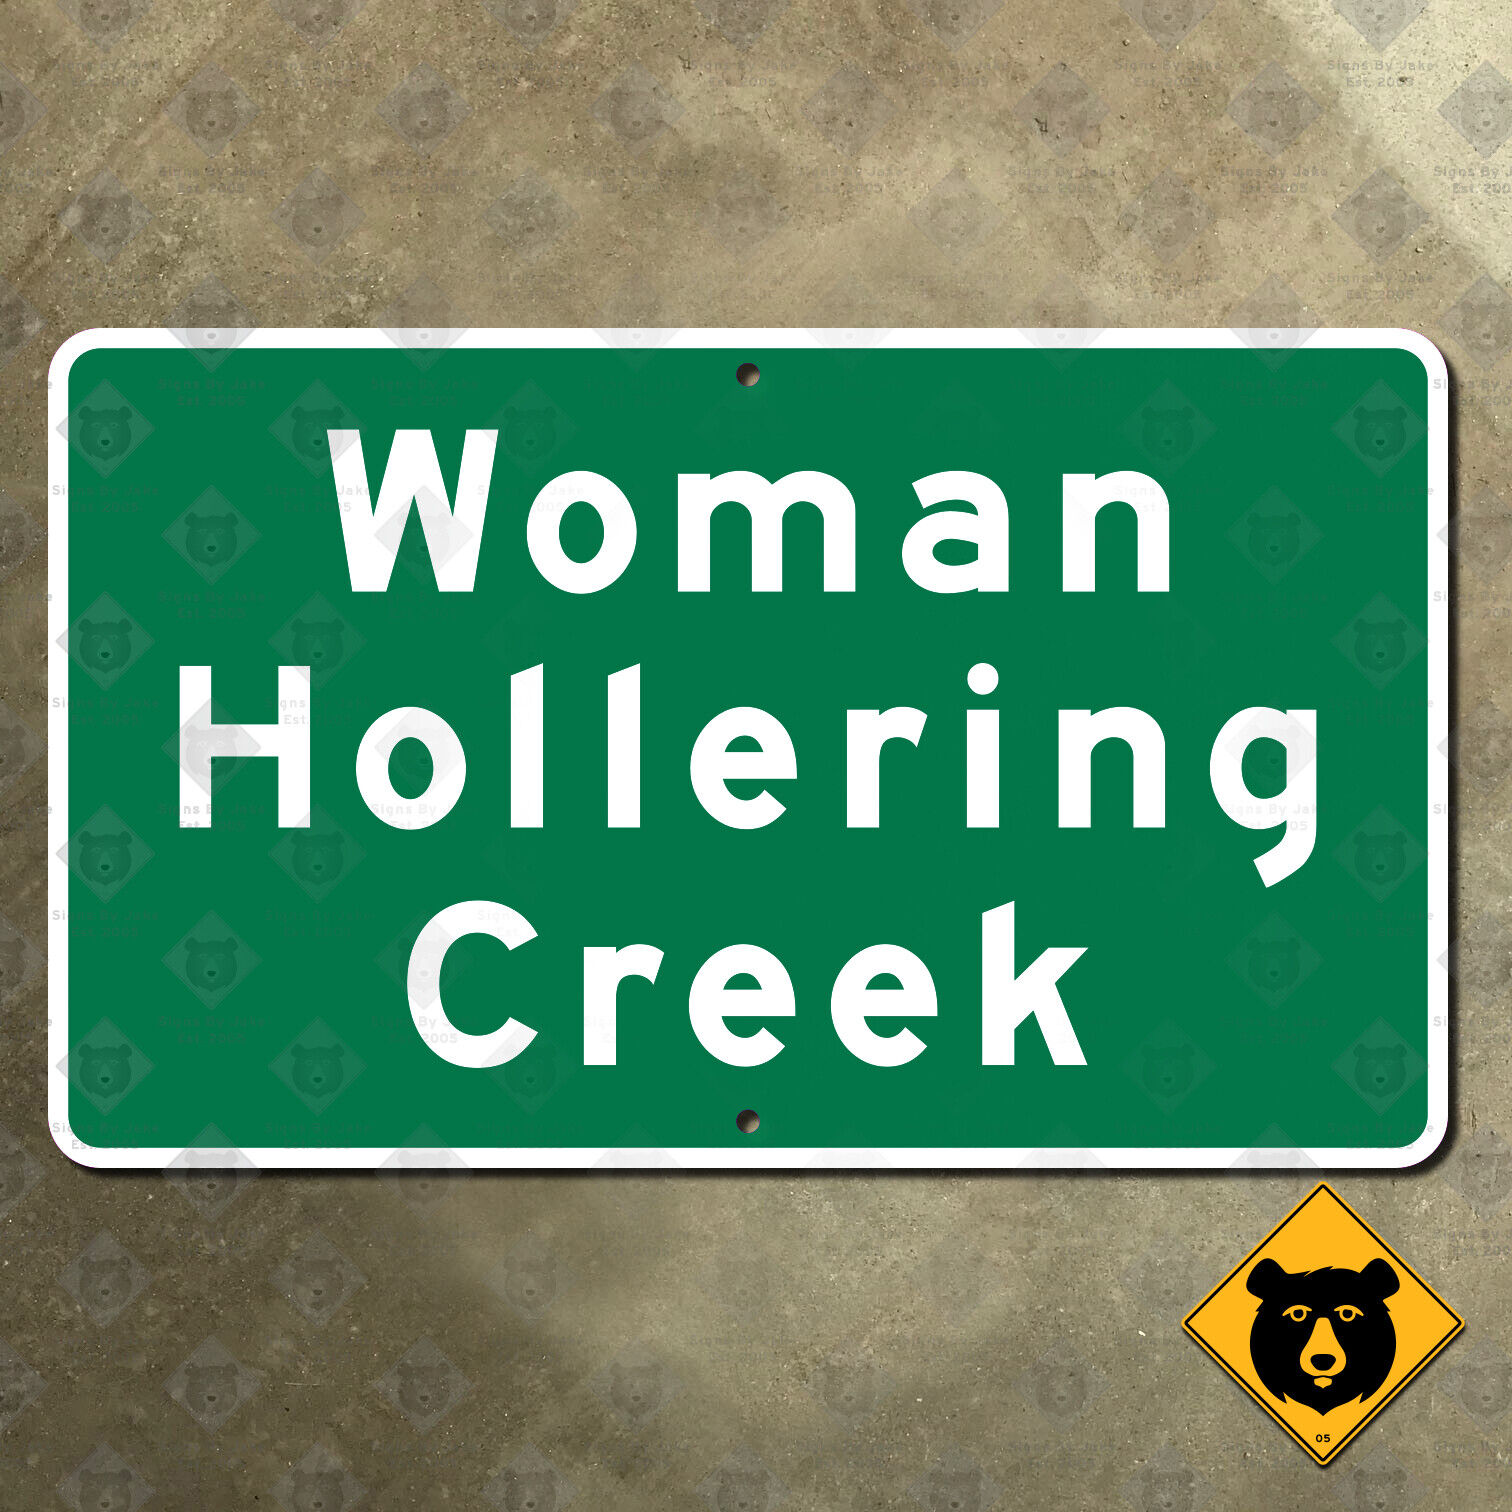 Woman Hollering Creek Texas highway marker guide road sign 1990s I-10 15x9